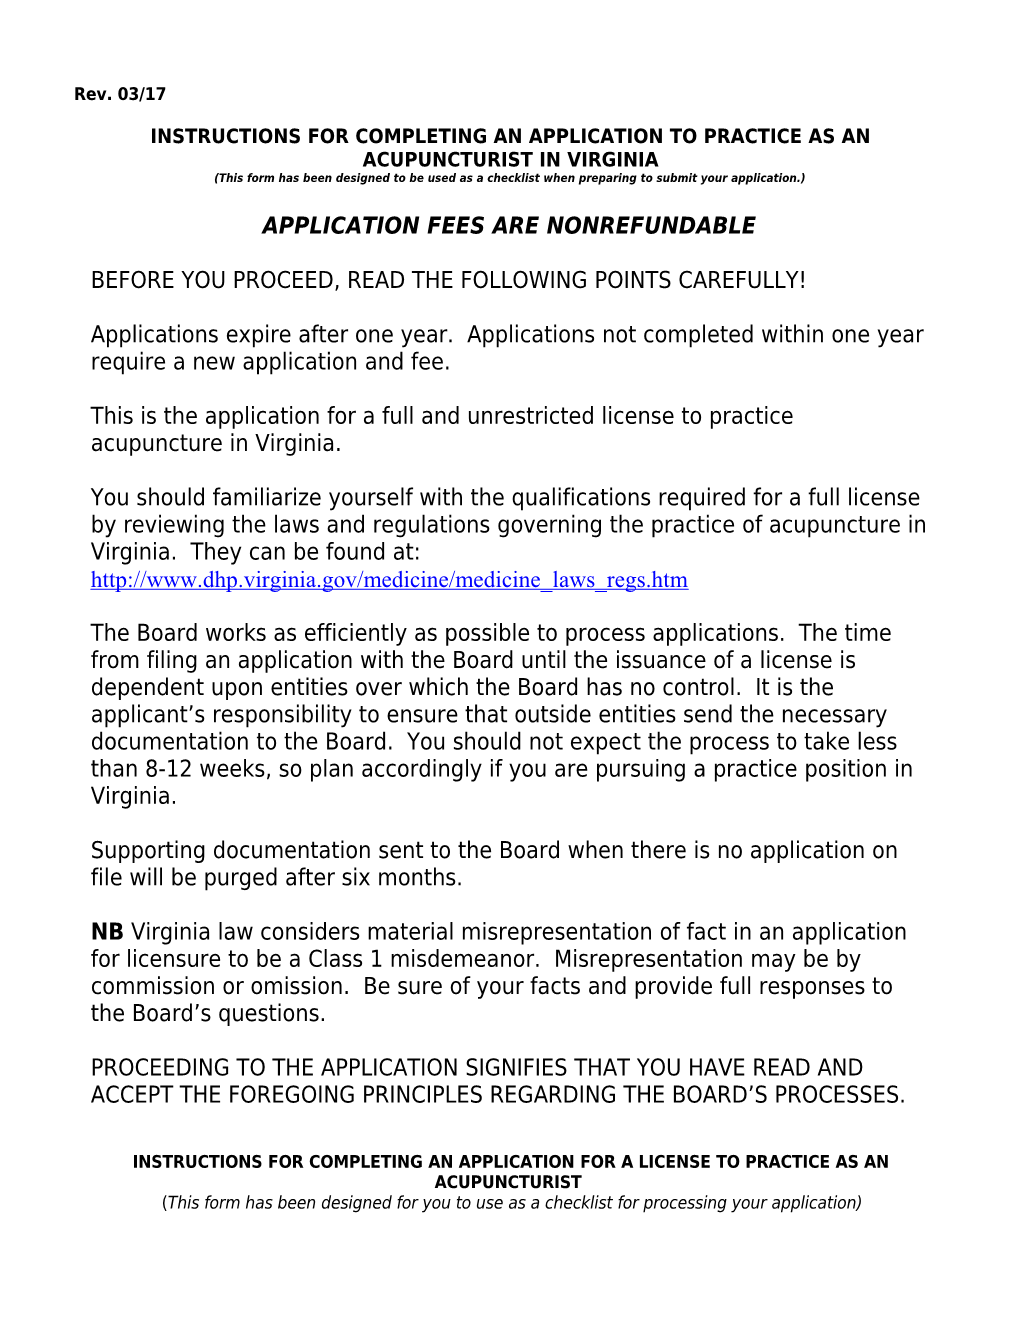 Instructions and Application for Licensed Acupuncturist, American Graduates